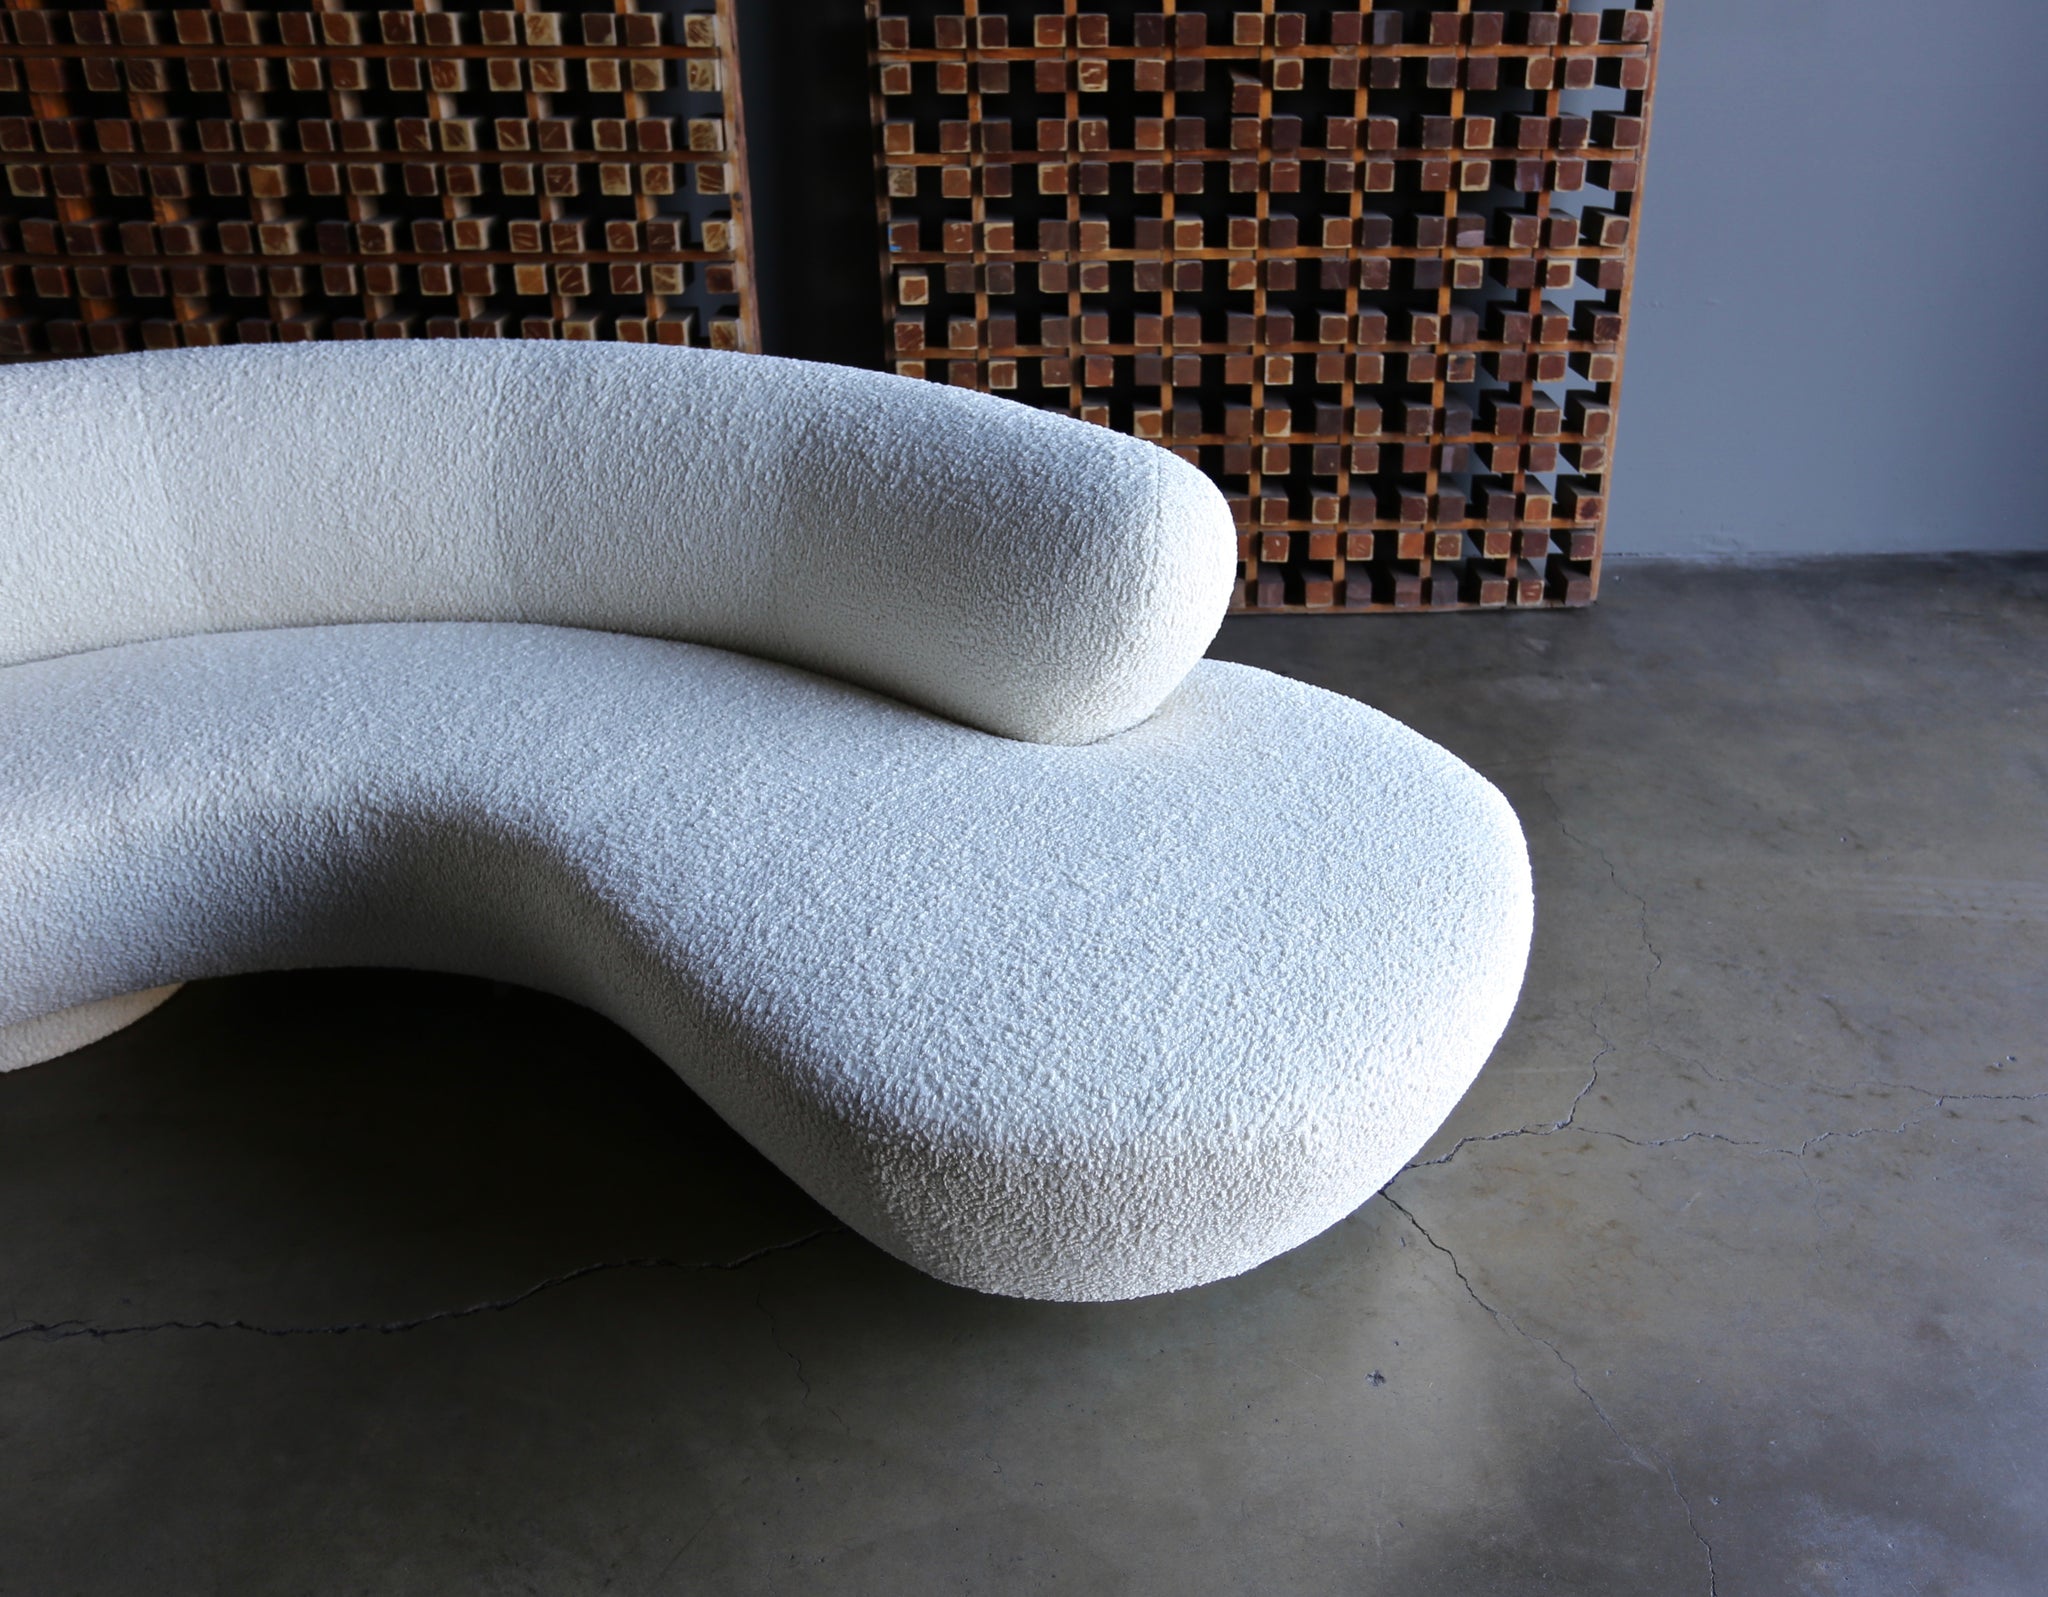 =SOLD = Vladimir Kagan Curved Serpentine Cloud Sofa for Directional